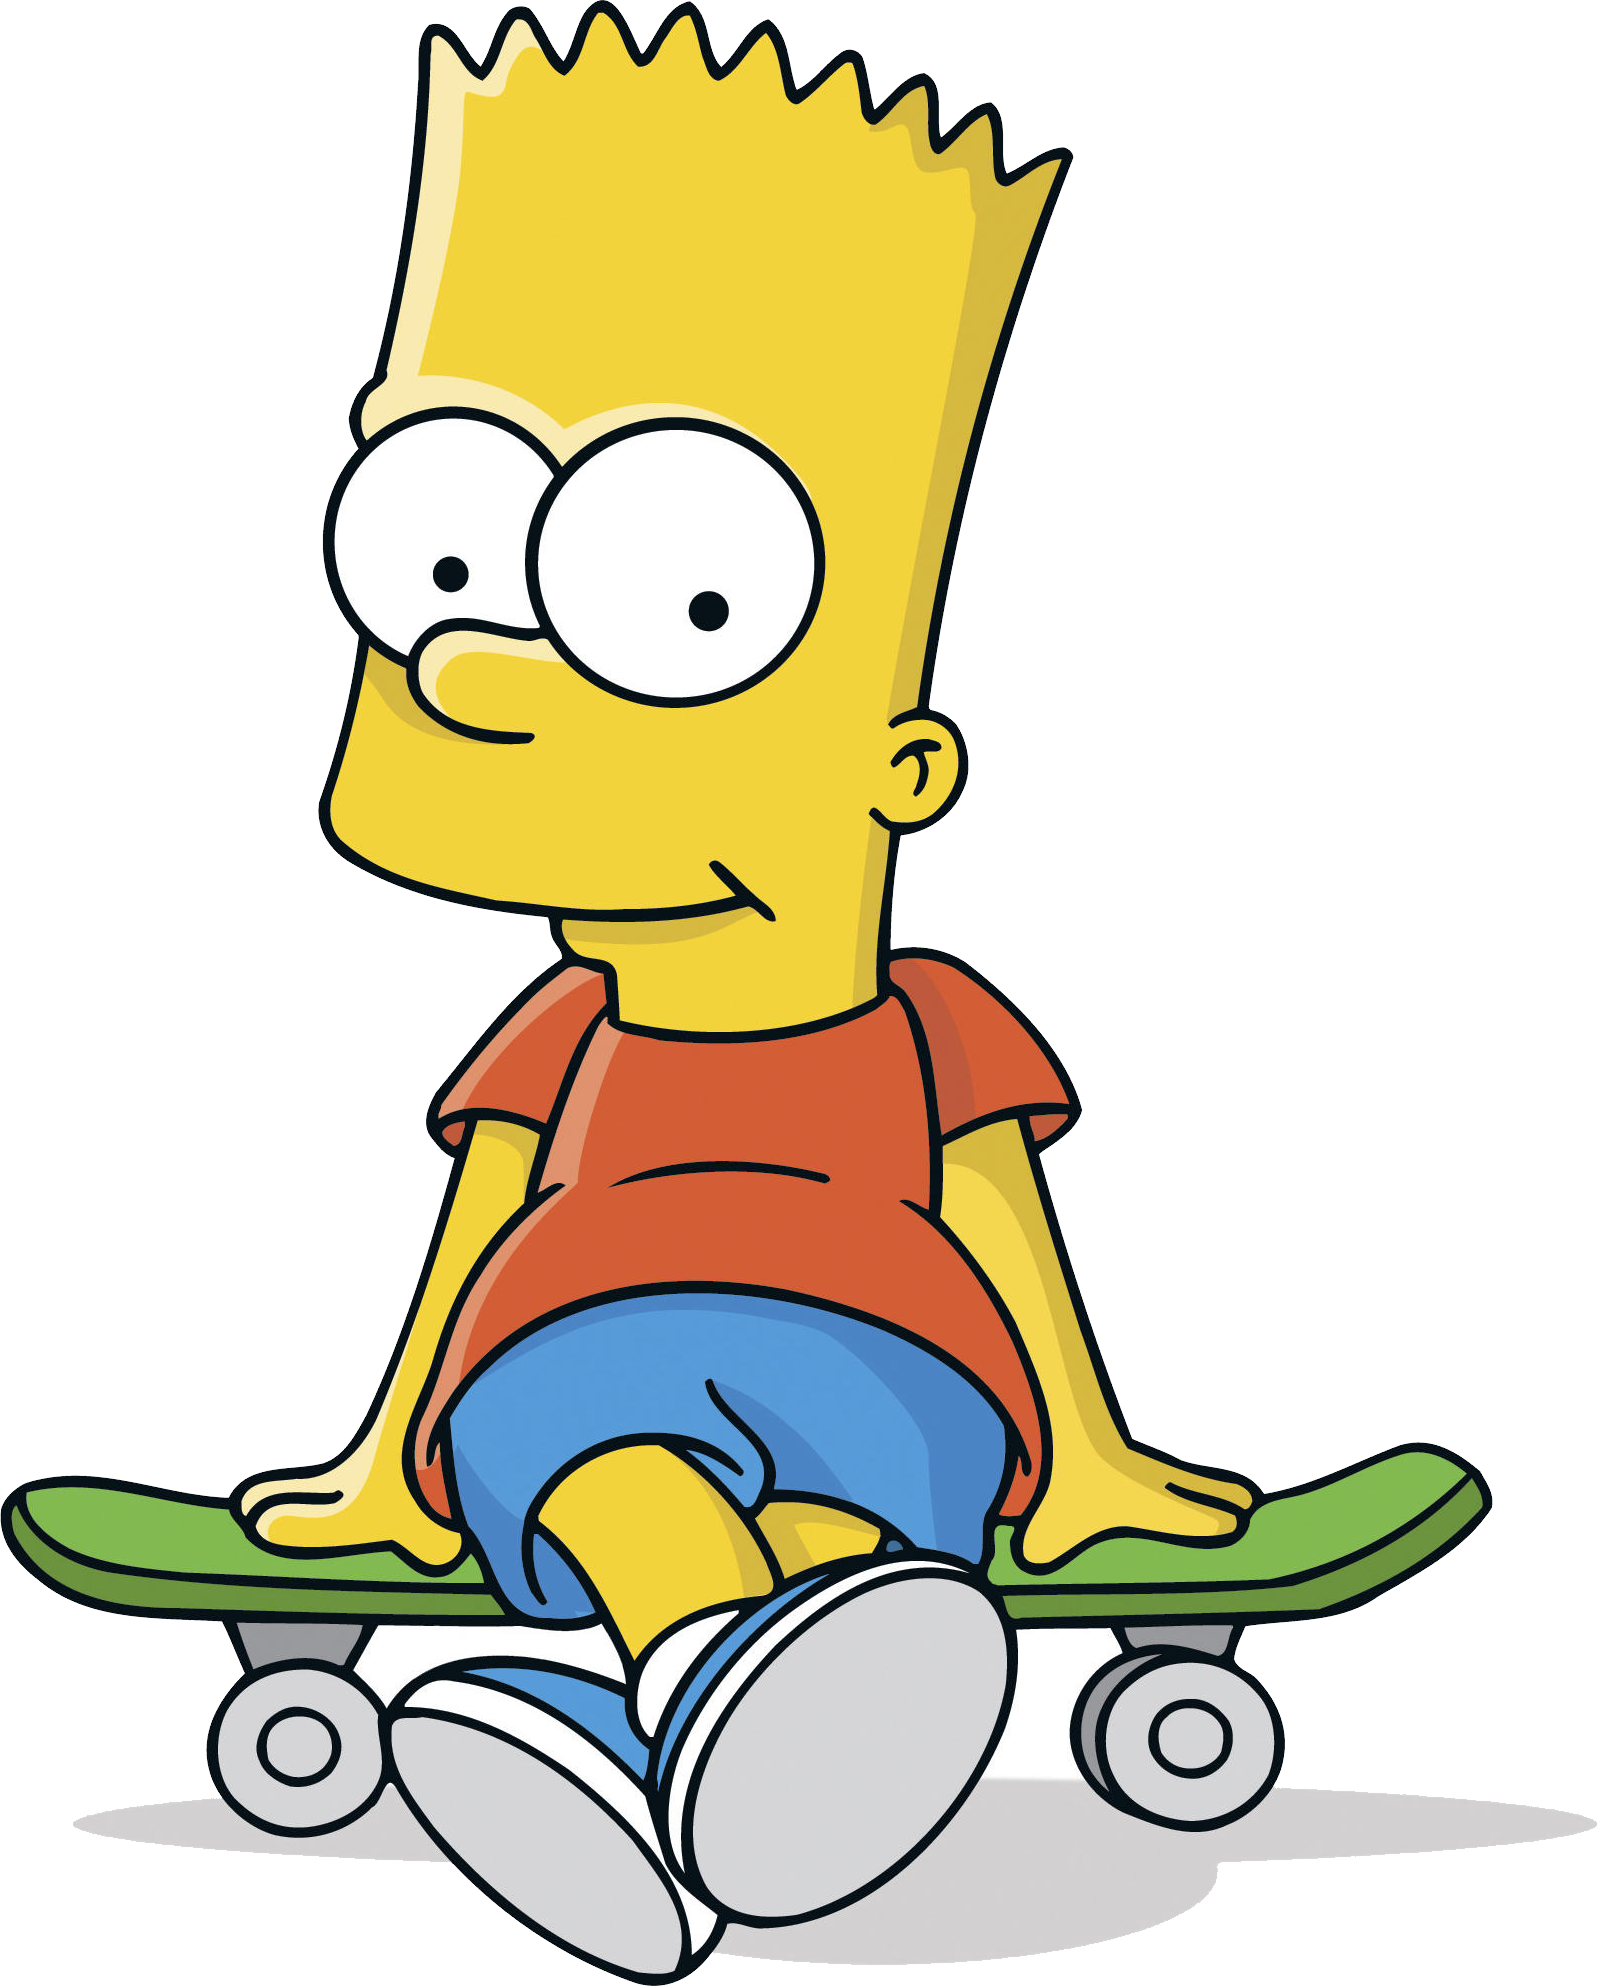 [Image: simpsons_PNG12.png]